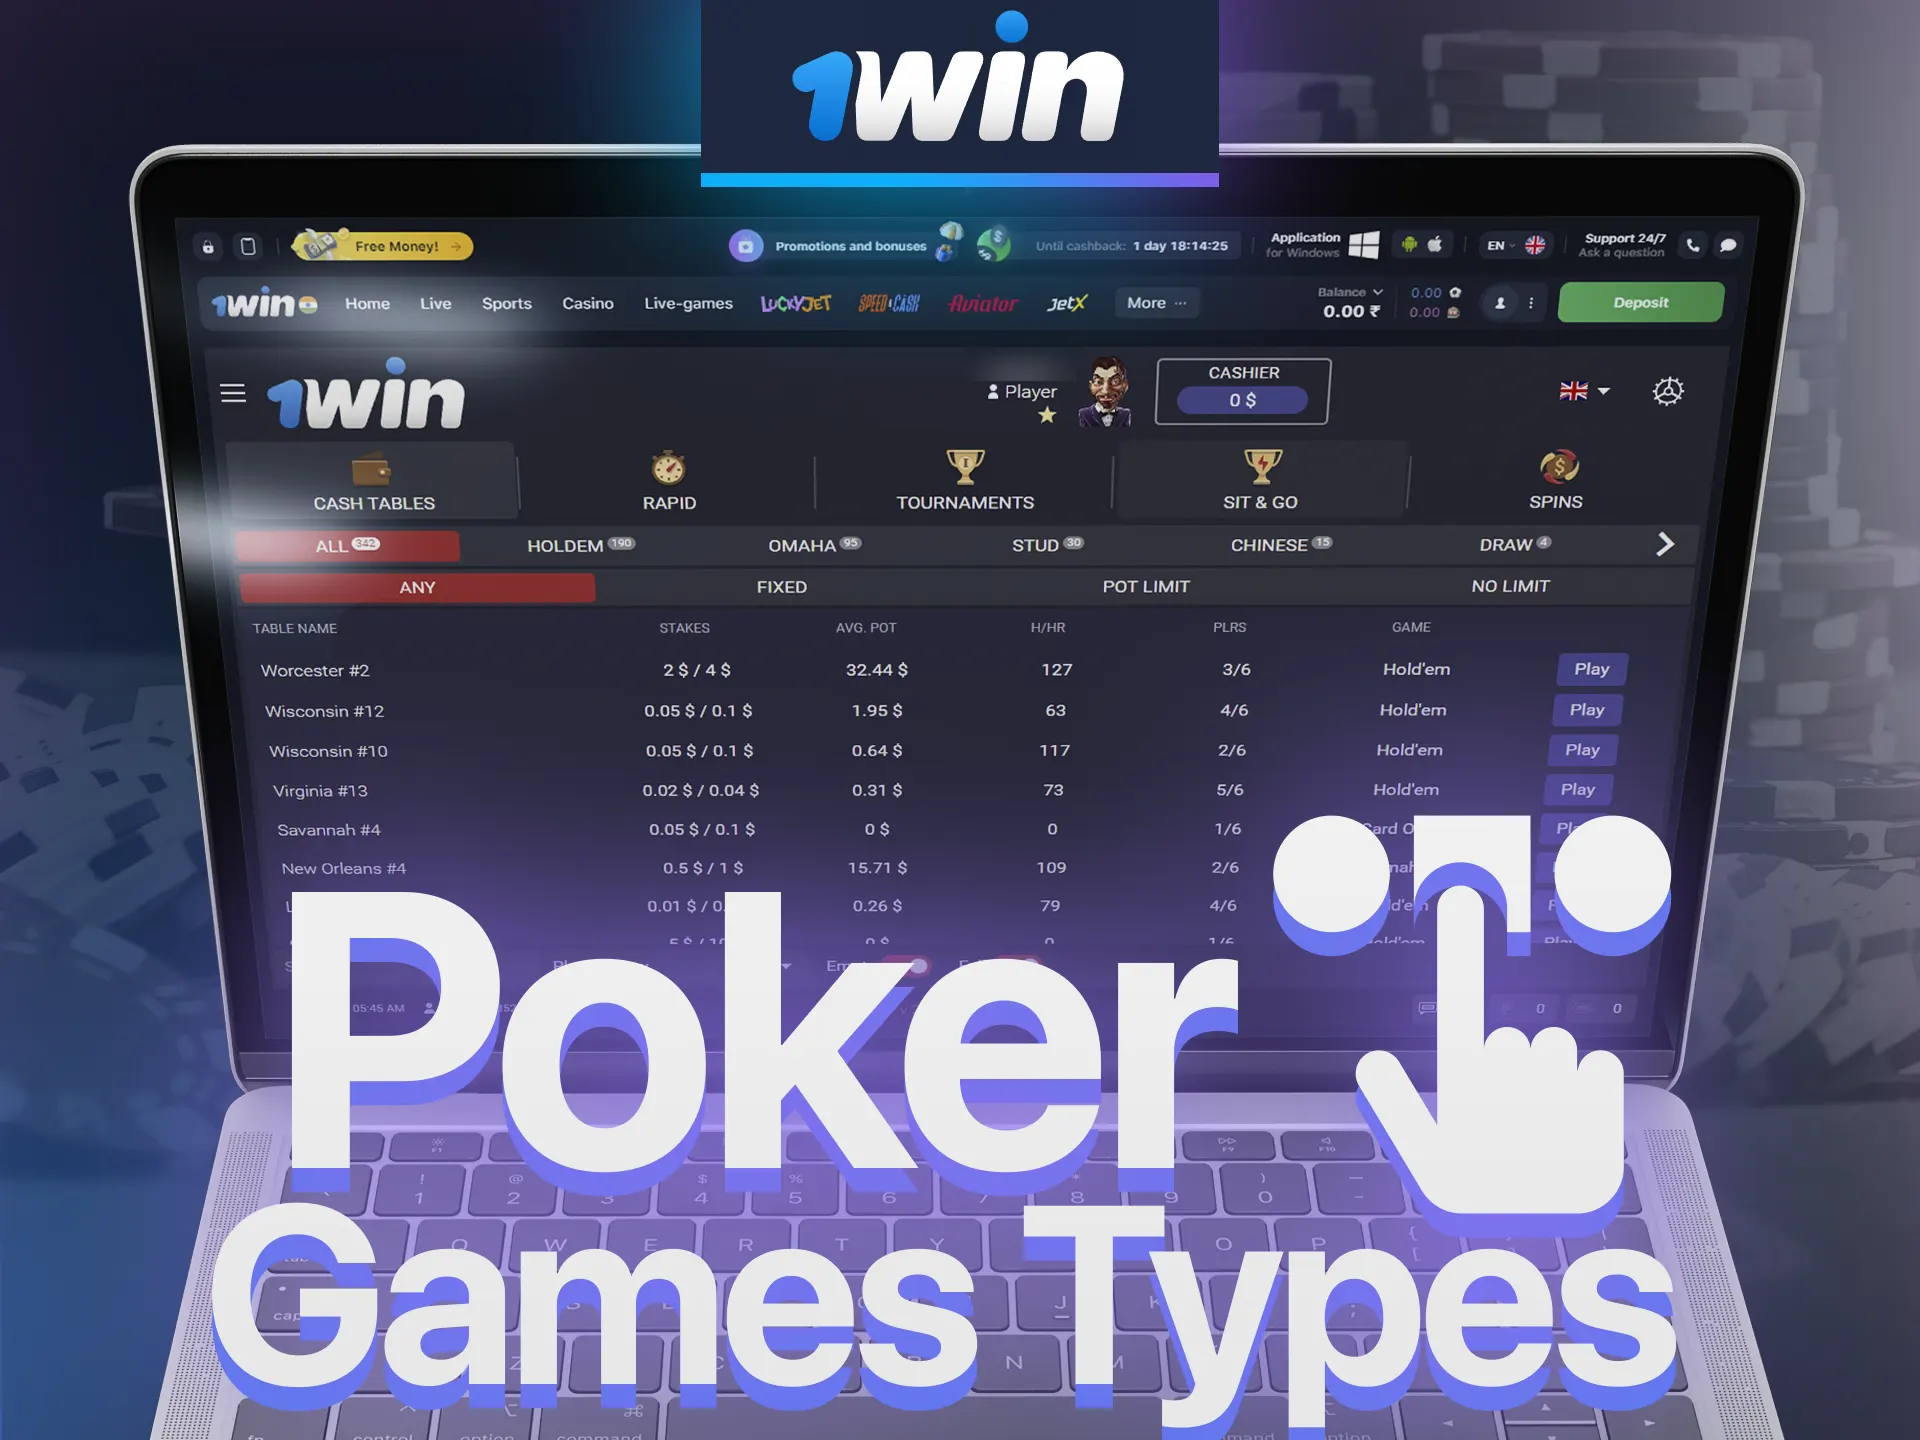 With 1Win, you have different types of poker available for you to play.